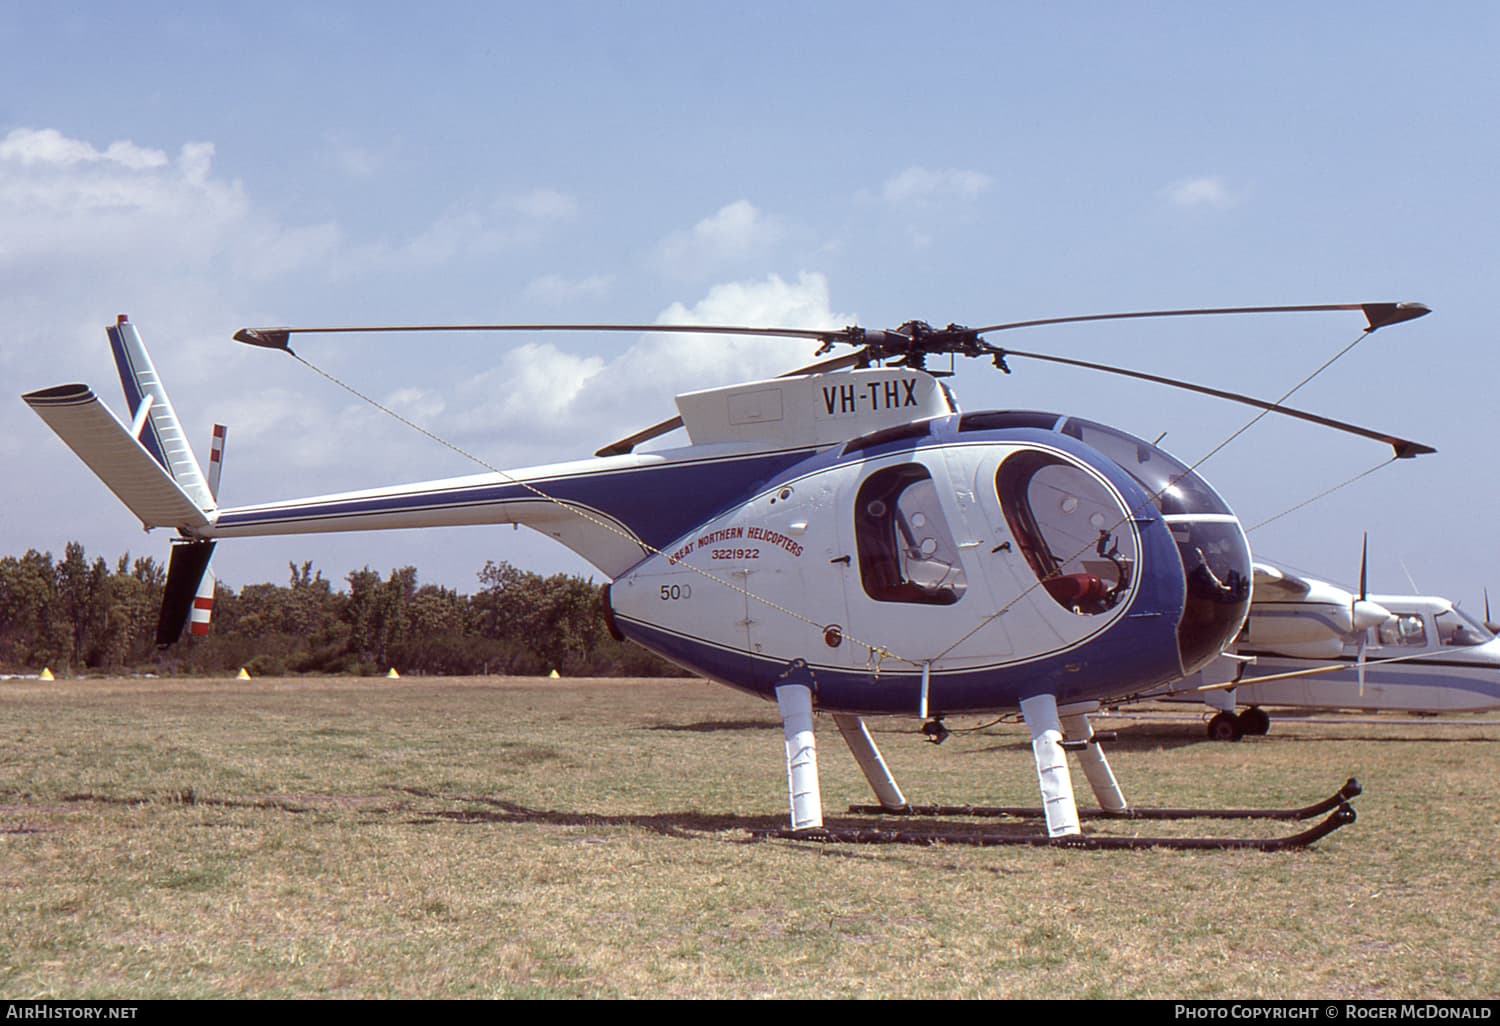 Suggestions for the planned helicopter add-on - Aircraft